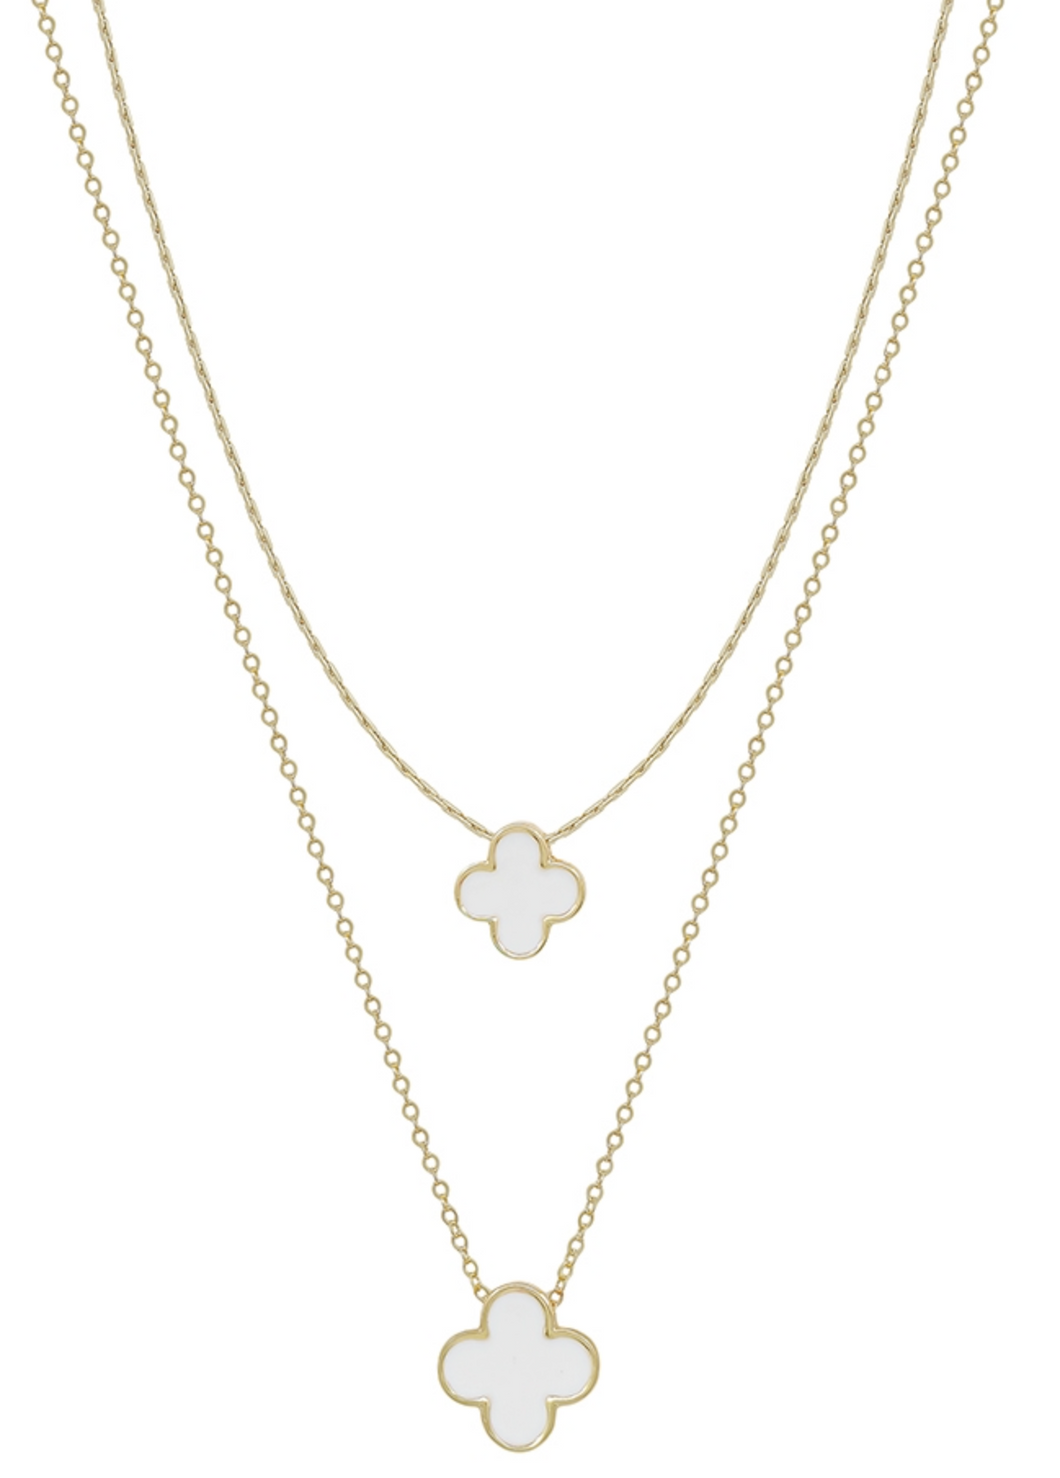 Double Layered White Clover Necklace